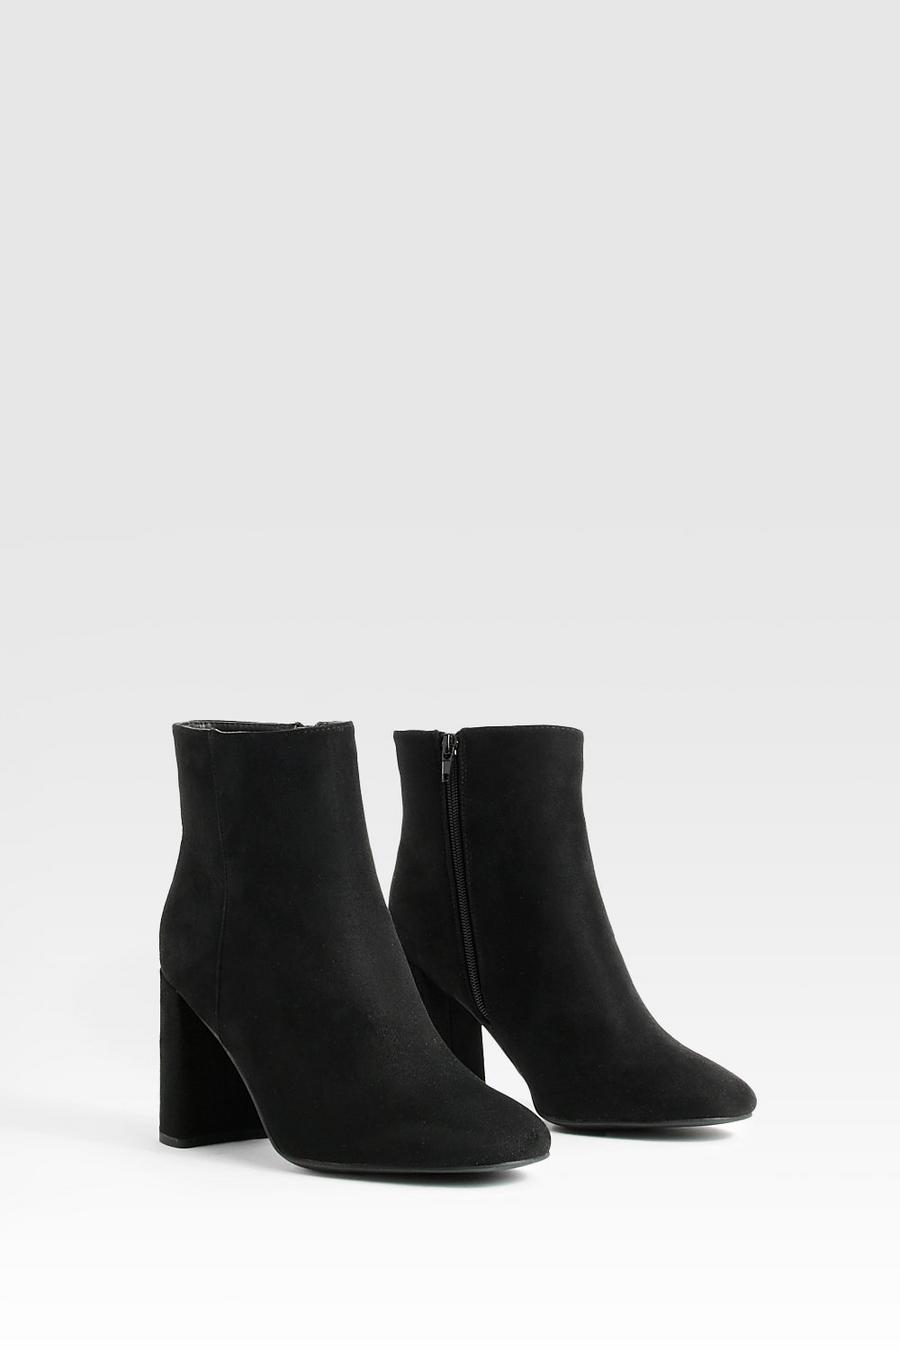 Black Wide Fit Round Toe Block Heel Faux Suede Ankle Boots image number 1